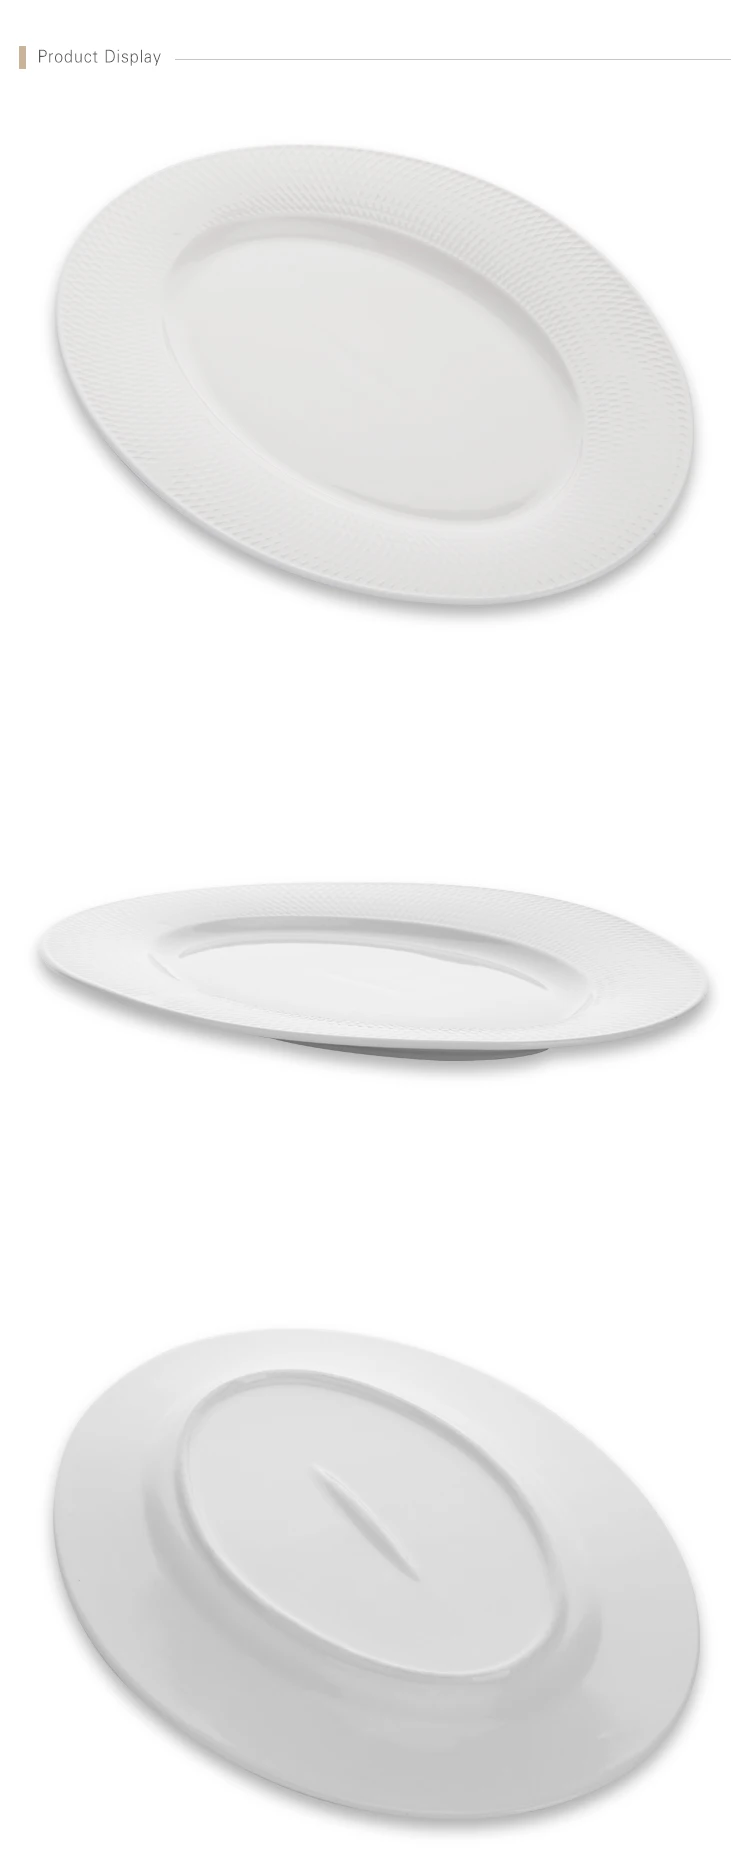 Kitchen Accessories 2019 Catering Supplies Ceramic Dinner Plates India Restaurant Oval Plate,  Oval Shaped Dinnerware<